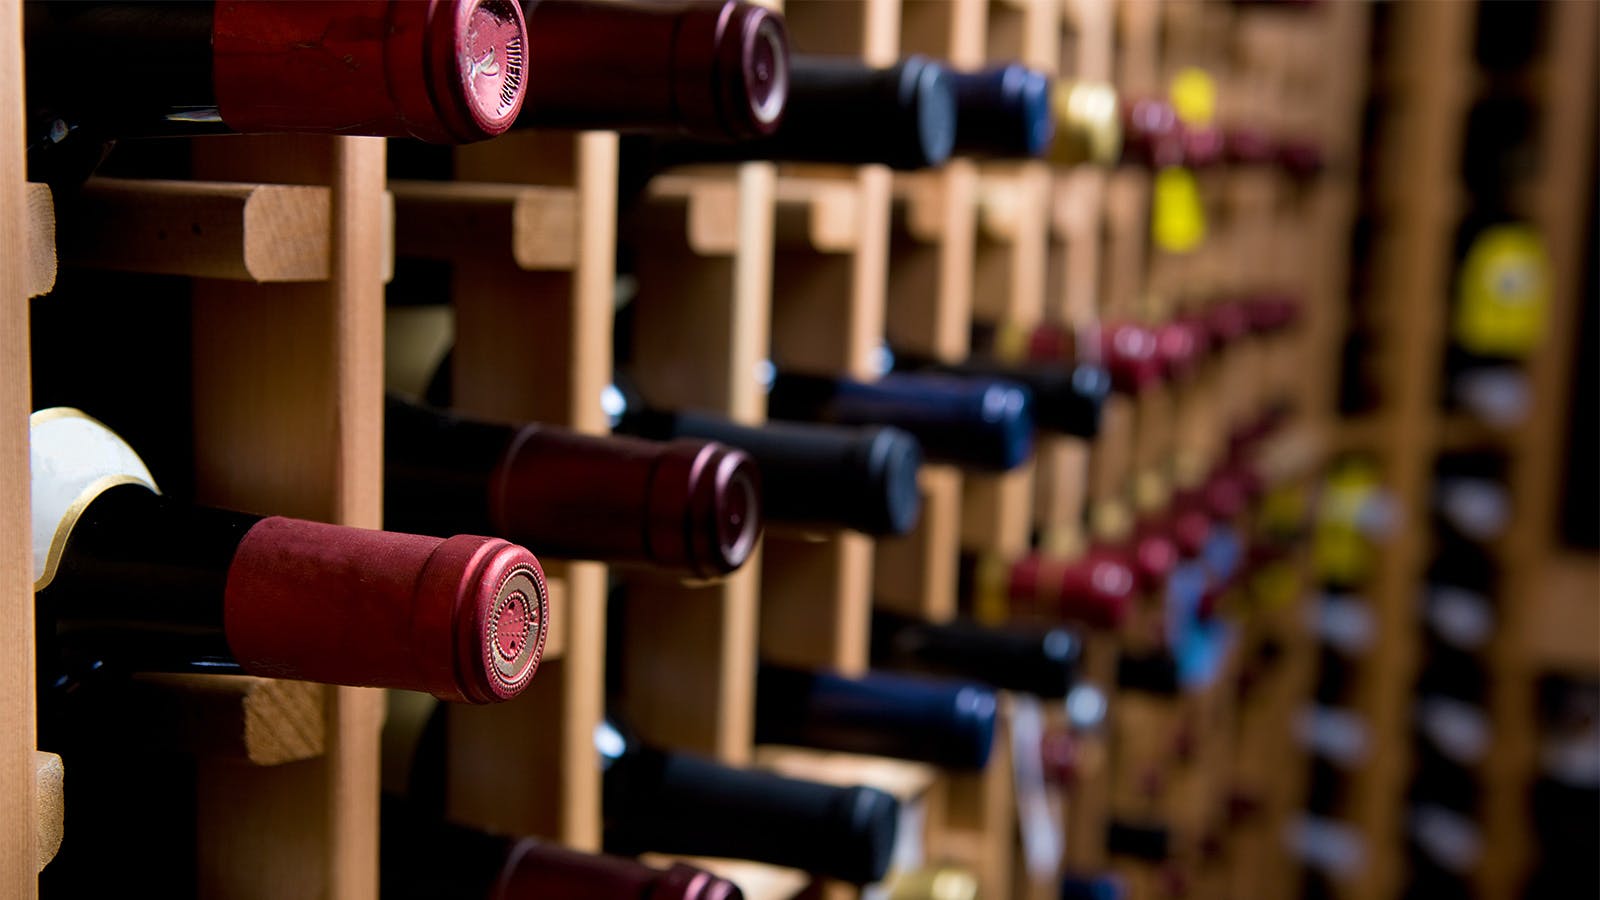 Redesign the Shopify wine-selling store to greatly improve user experience